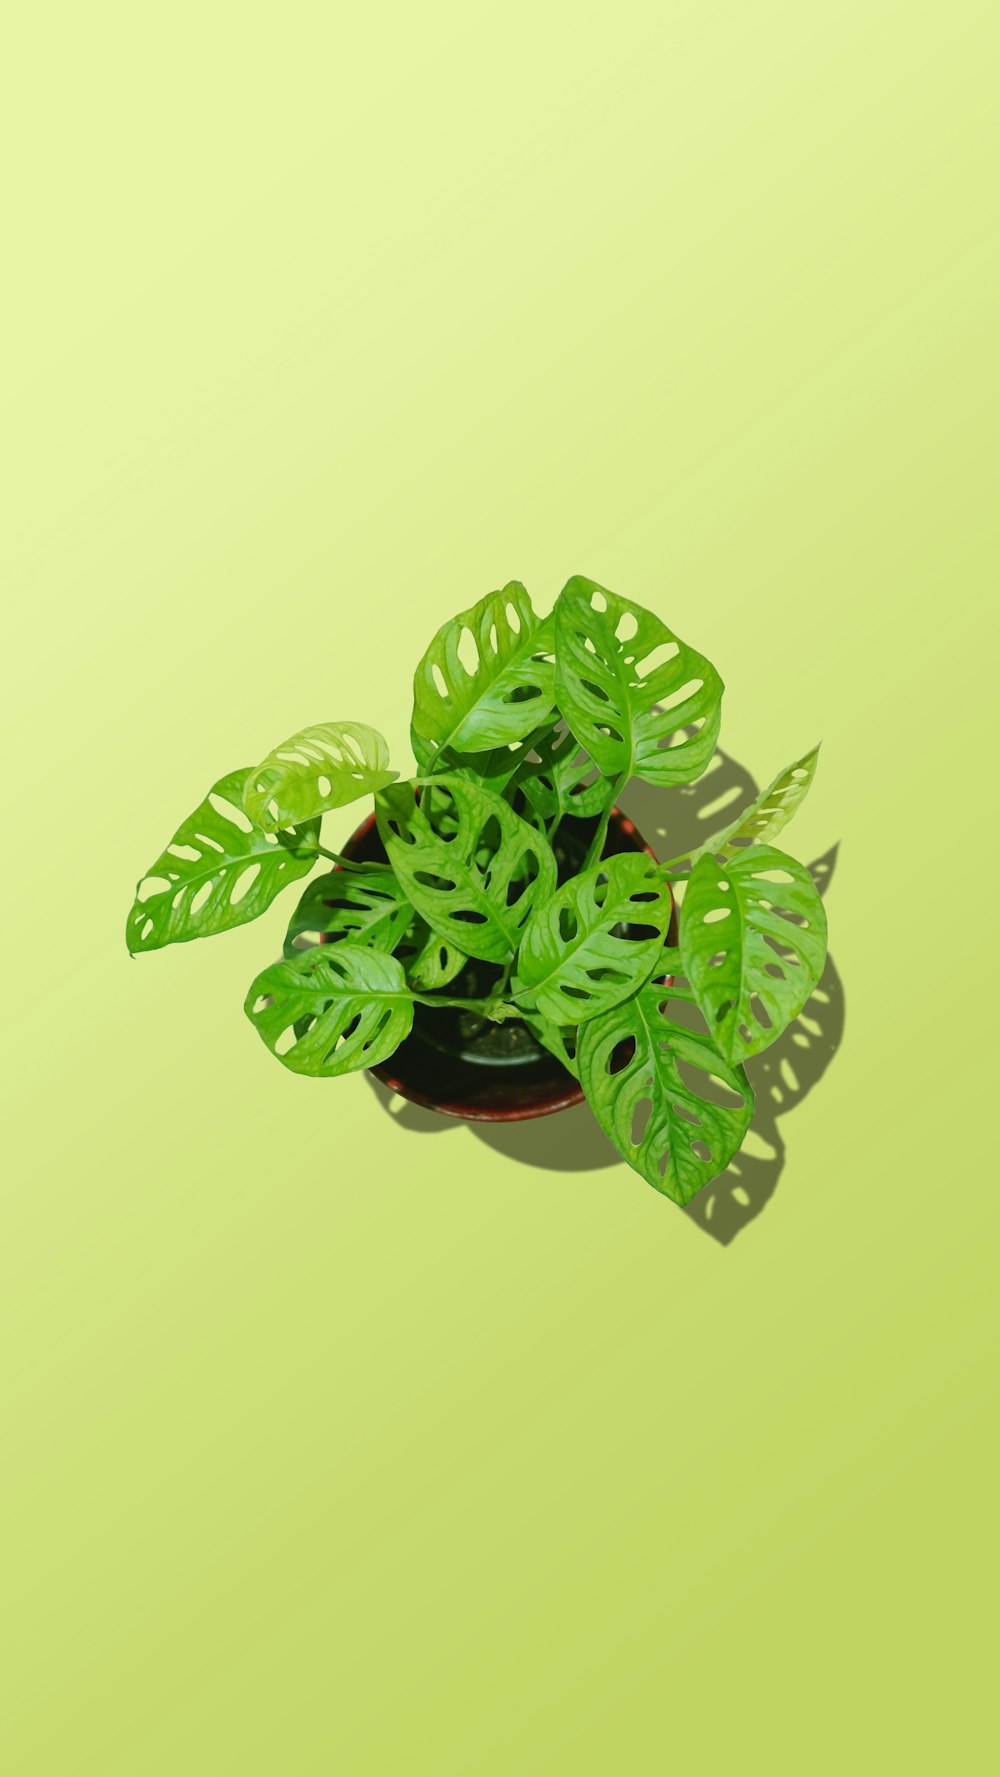 a green plant with leaves on a yellow background